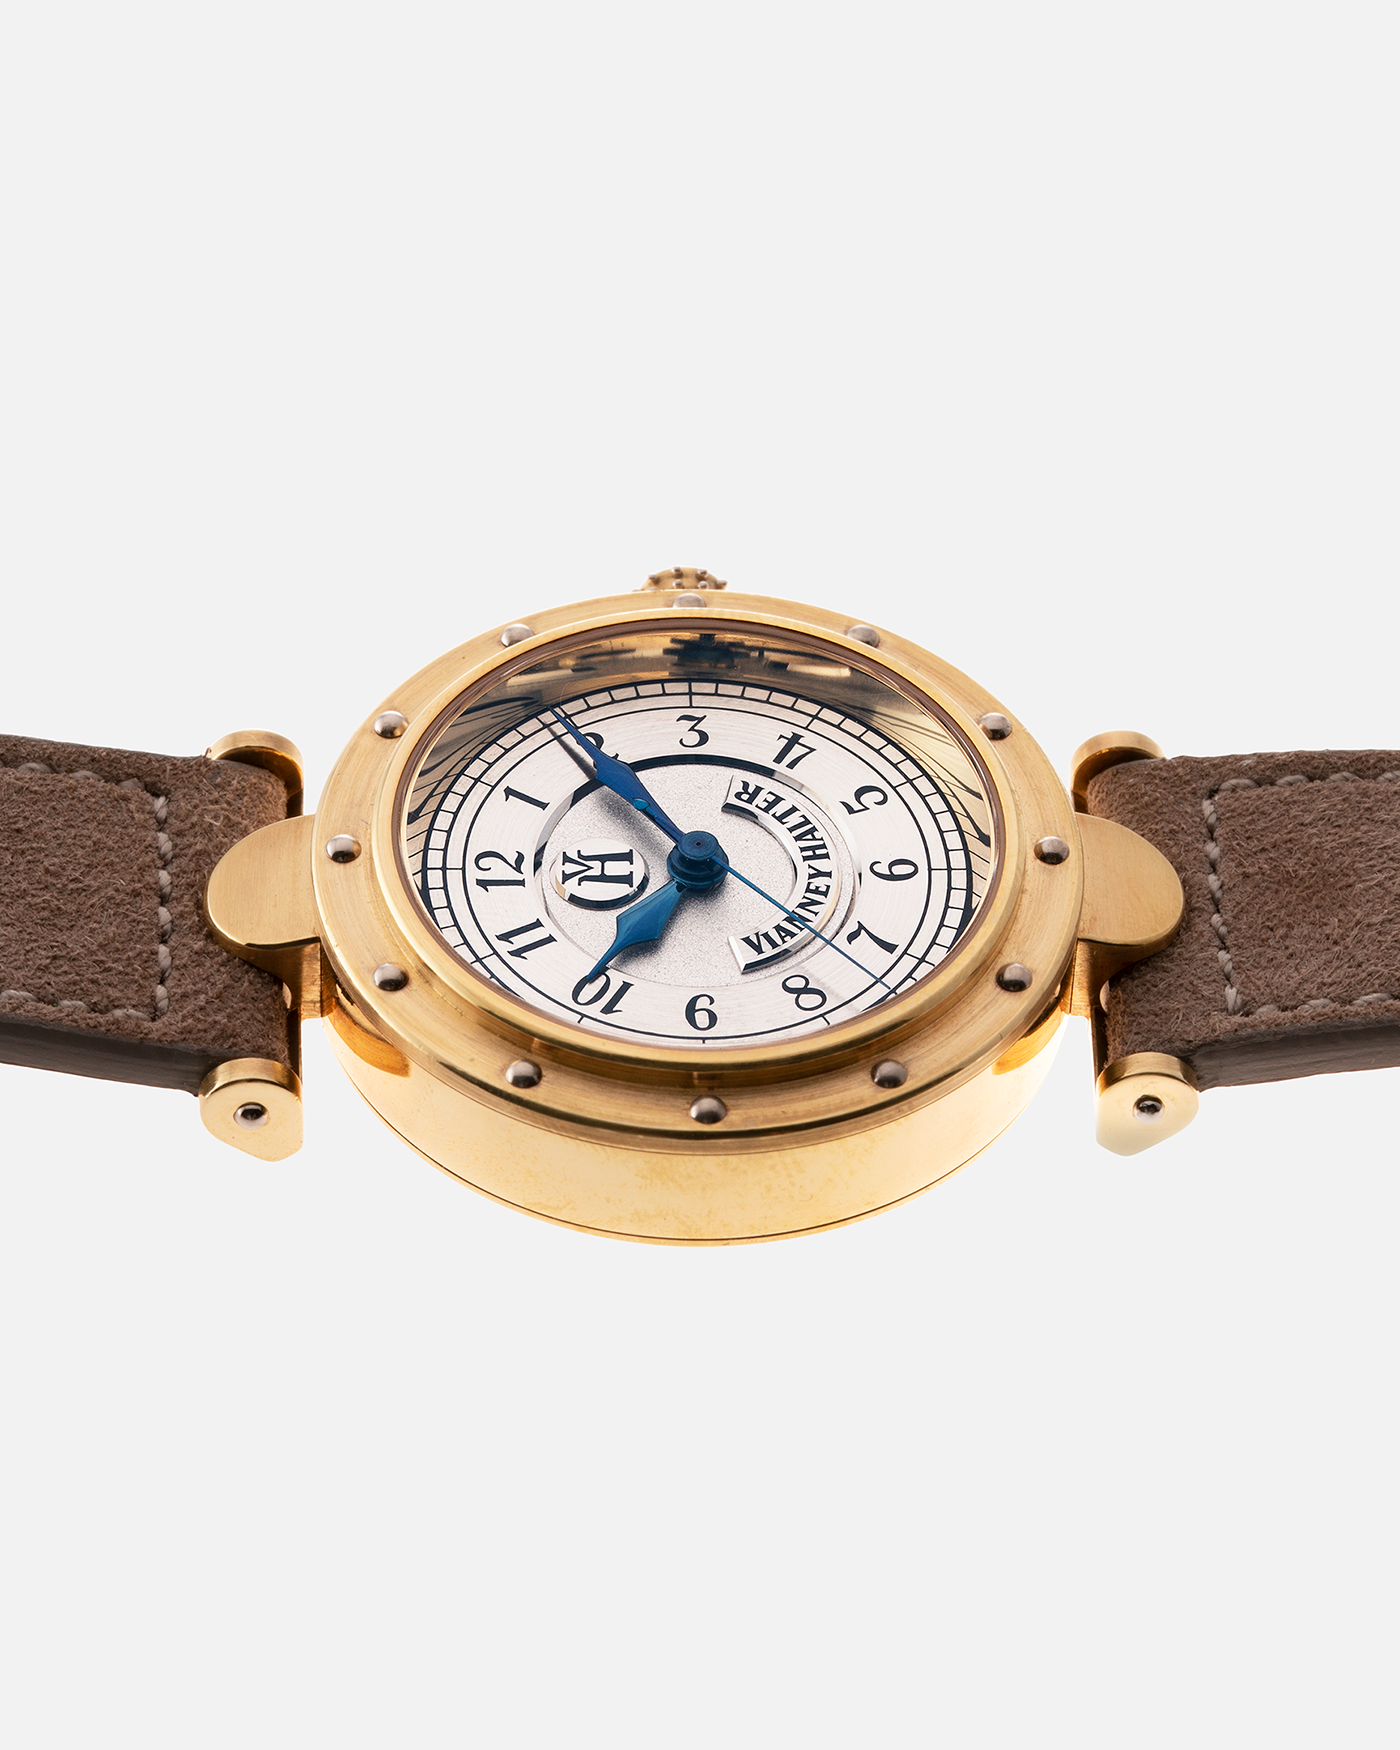 Brand: Vianney Halter Year: 2000’s Model: Classic Material: 18k Yellow Gold Movement: Modified Lemania 8810 with mystery motor Case Diameter: 36mm Bracelet/Strap: Molequin Beige Suede with matching Yellow Gold Buckle